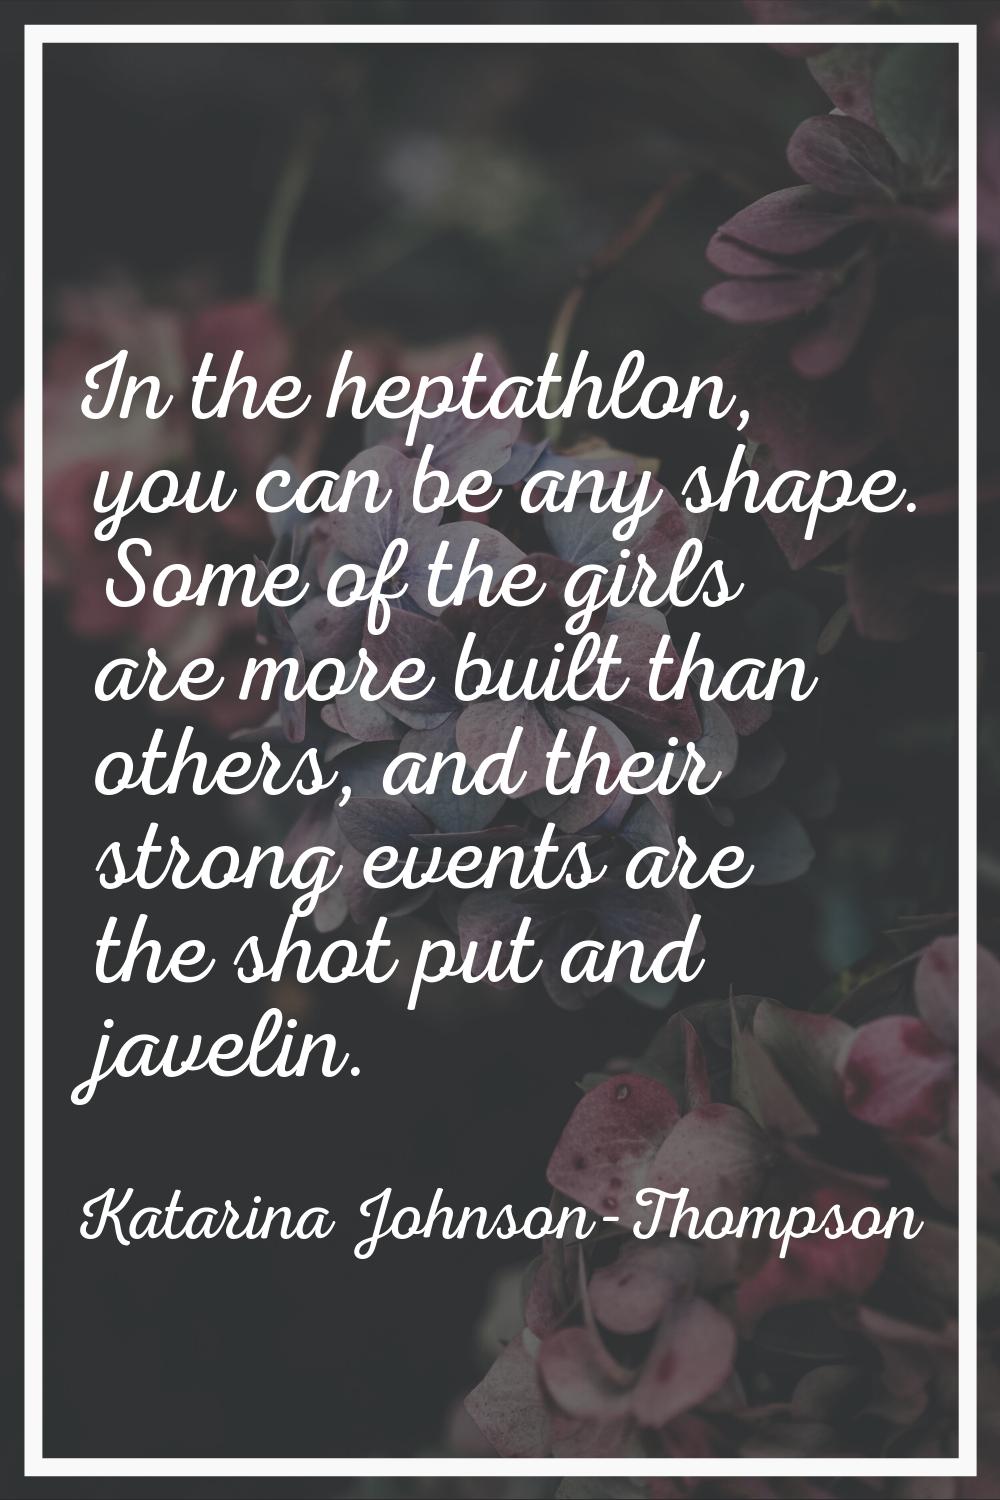 In the heptathlon, you can be any shape. Some of the girls are more built than others, and their st